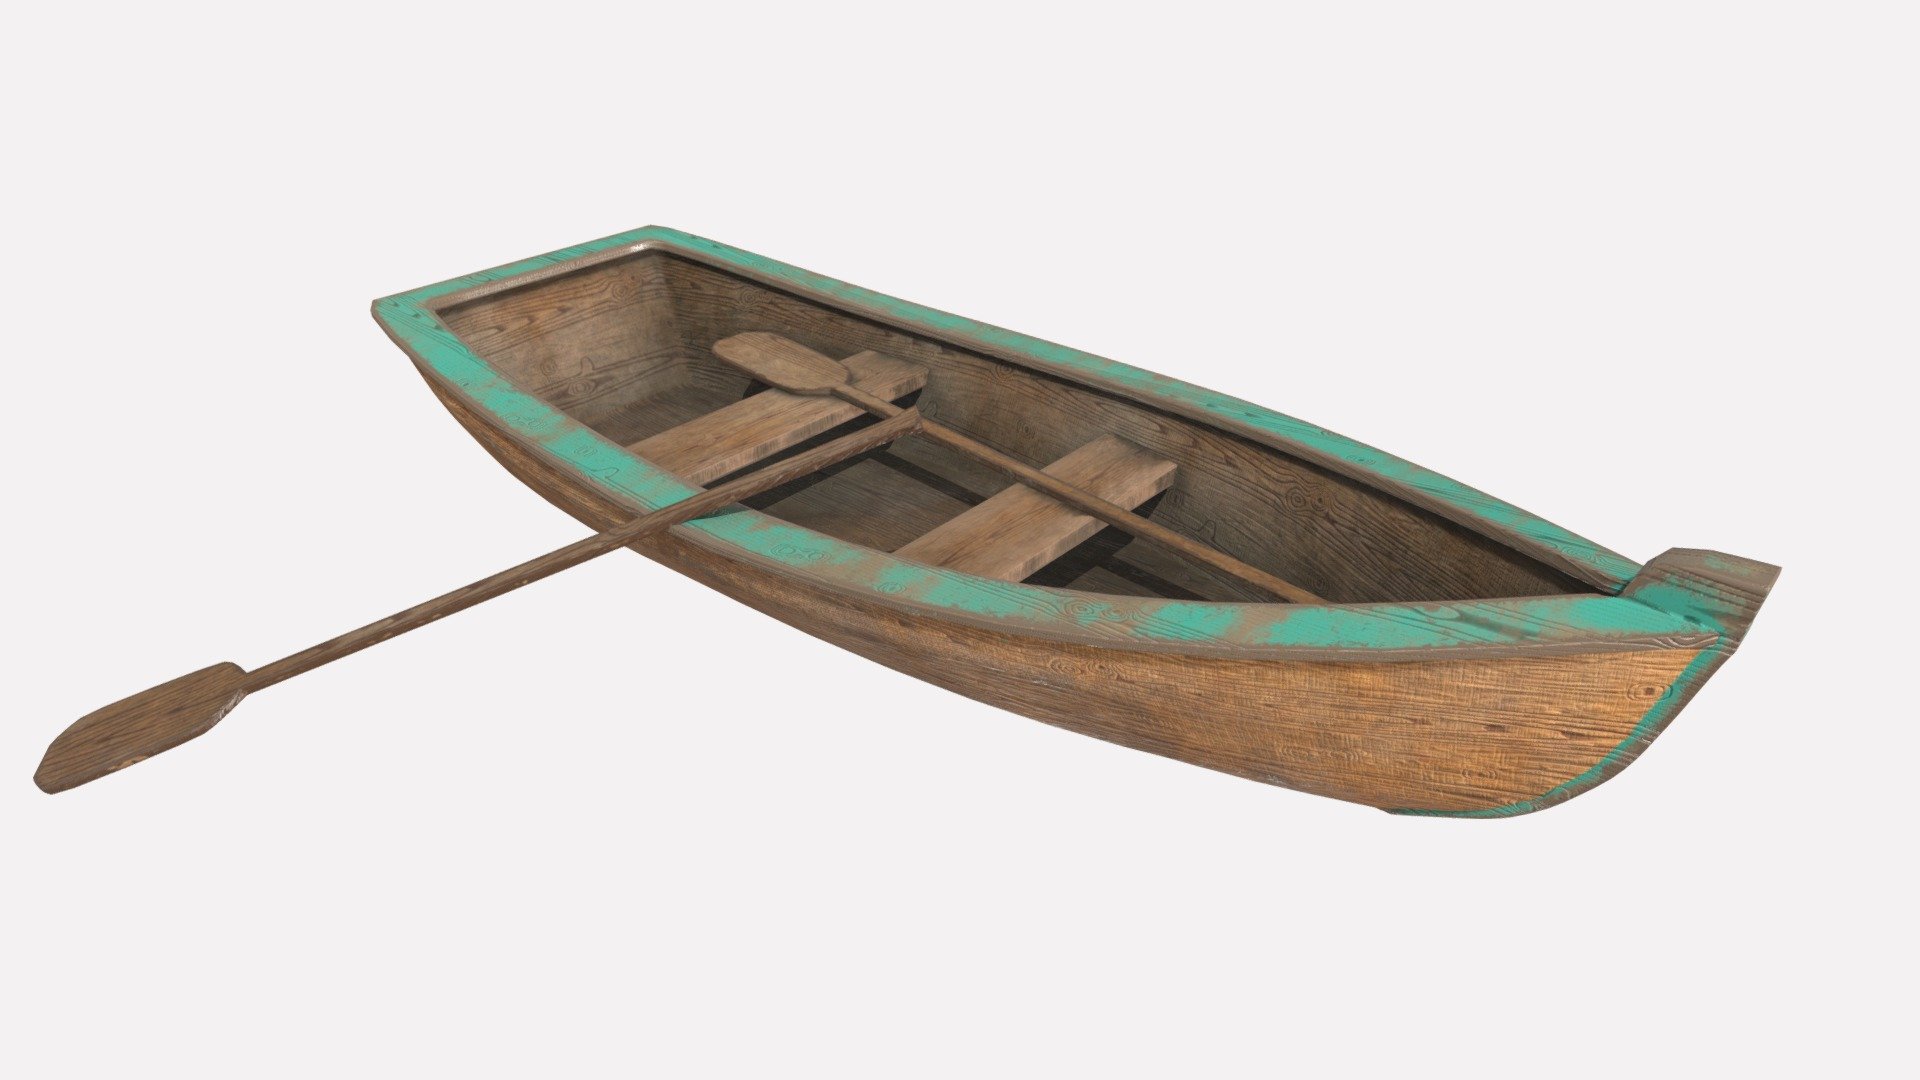 A low-poly row boat that I created for my class in environment design 3d model